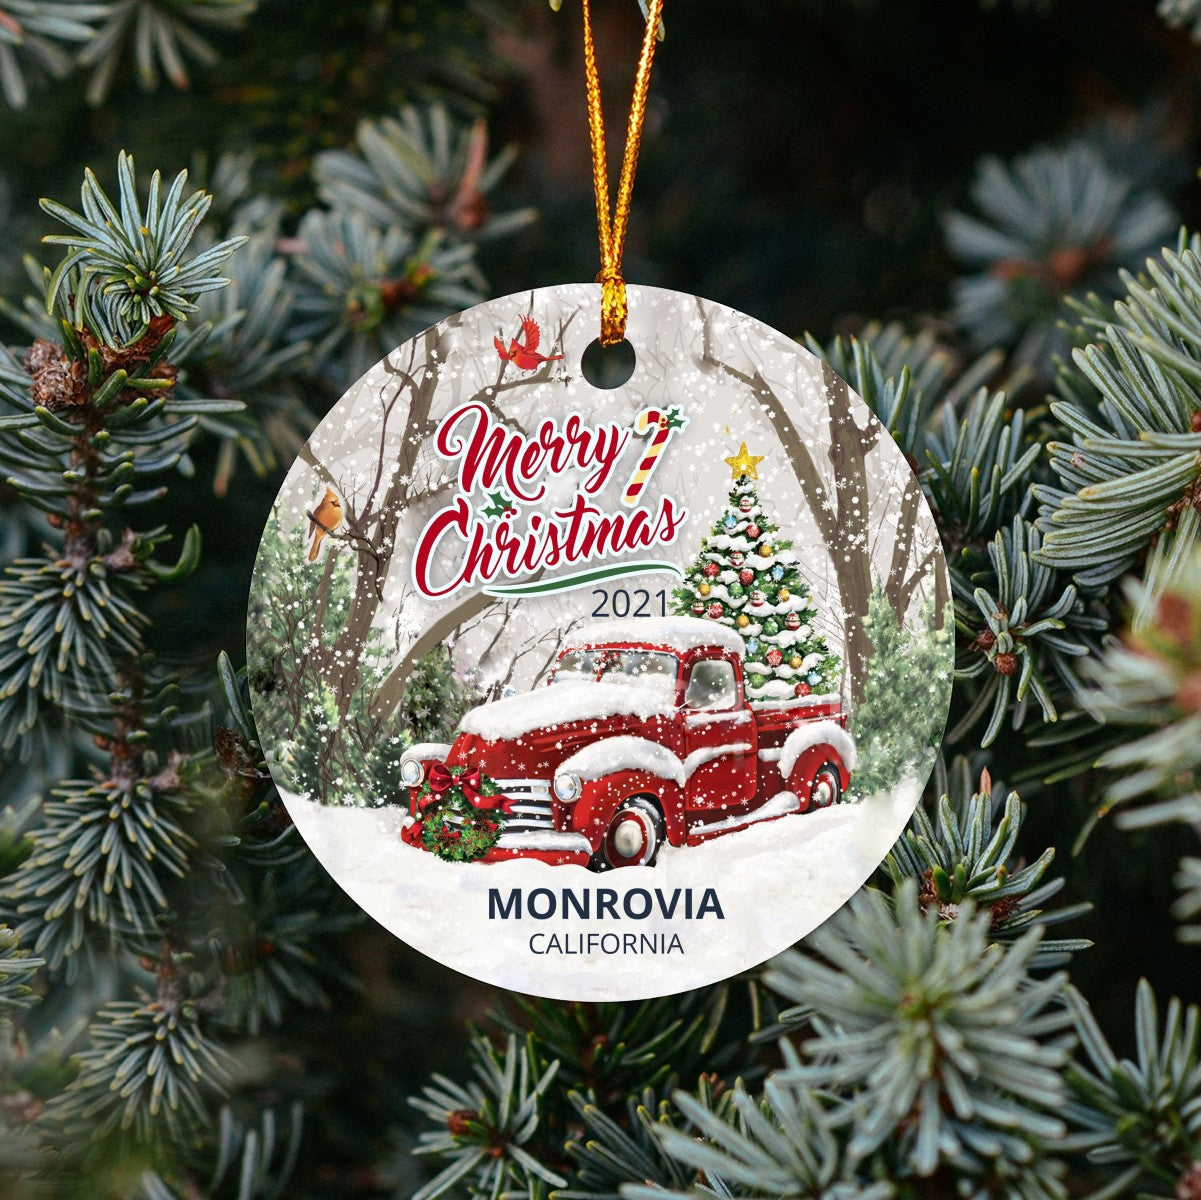 Christmas Tree Ornaments Monrovia - Ornament Customize With Name City And State Monrovia California CA - Red Truck Xmas Ornaments 3'' Plastic Gift For Family, Friend And Housewarming